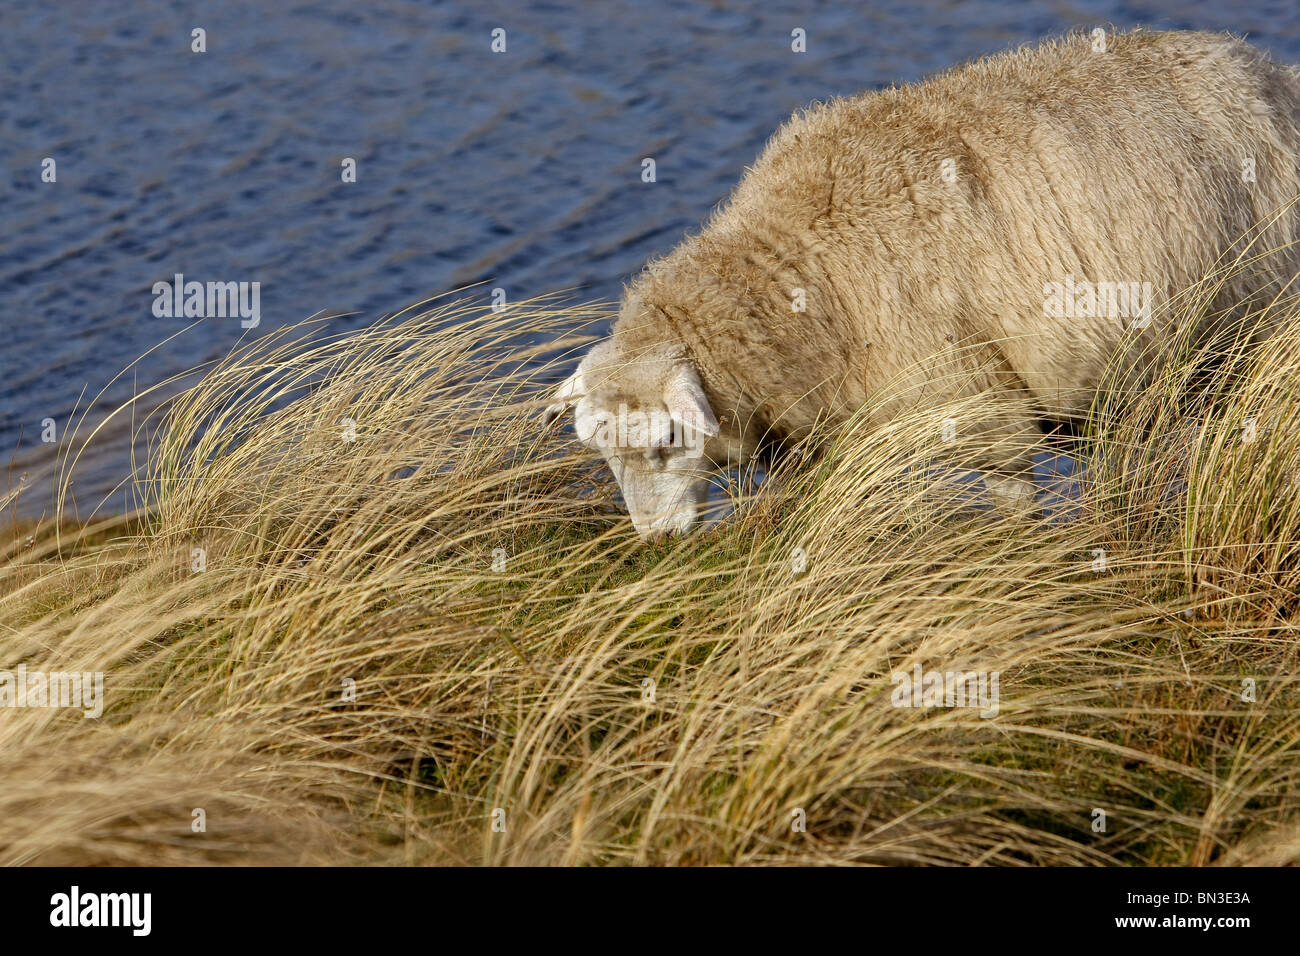 Sheep (Ovis aries) is grazing in long grass, Sylt, Germany, elevated view Stock Photo